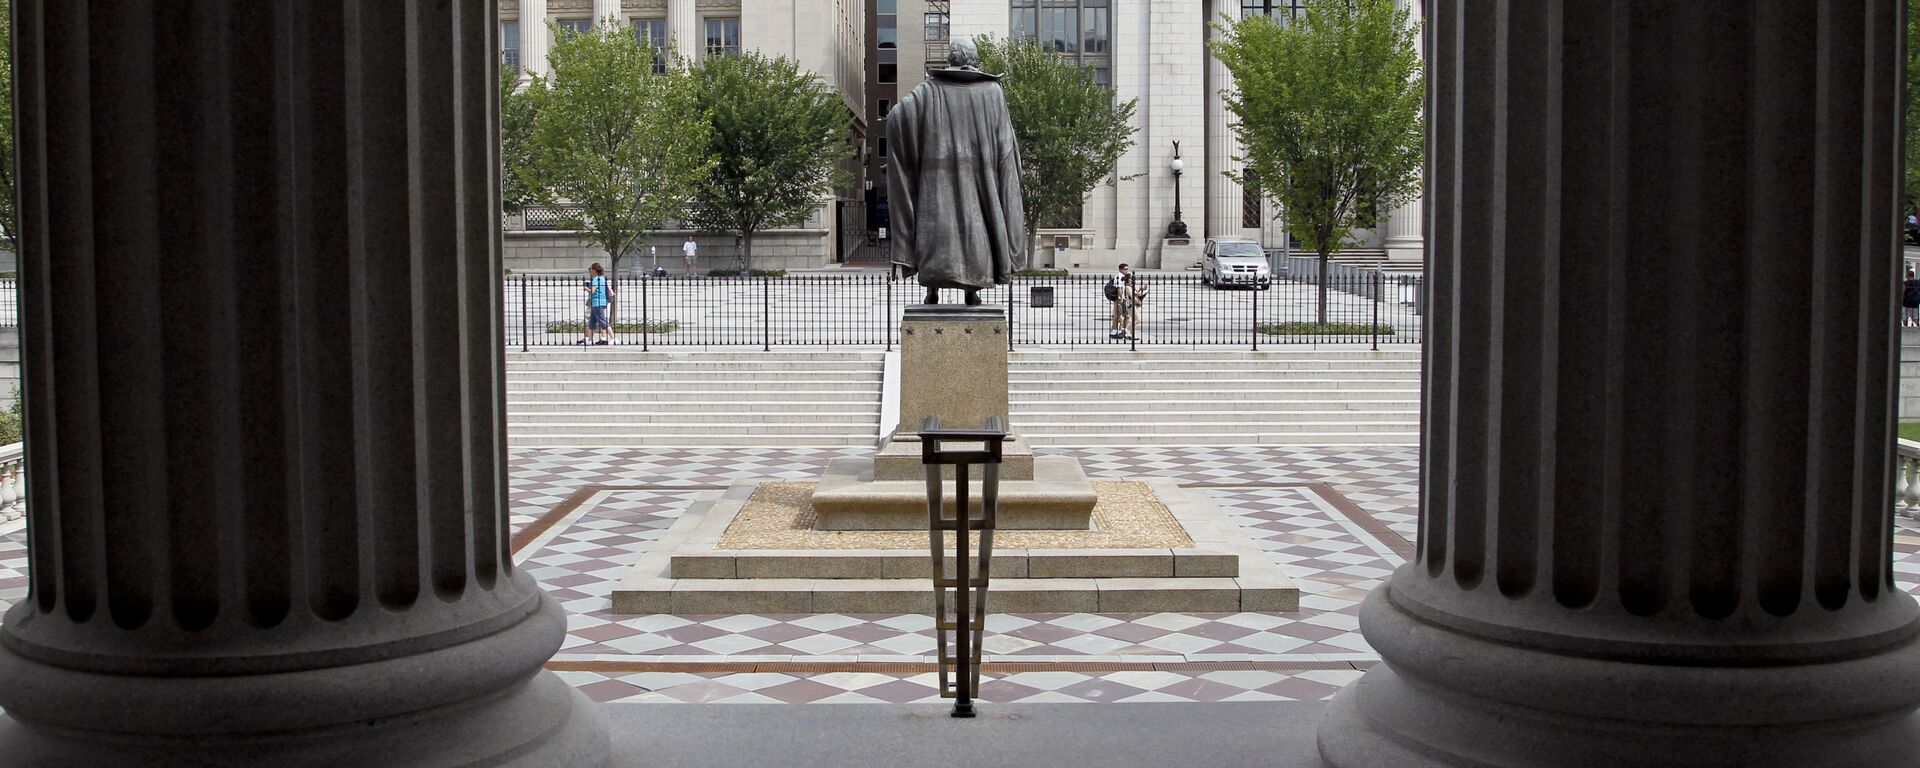 In this Aug. 17, 2010 file photo, a statue of the Albert Gallatin, the 4th Secretary of the Treasury, stands on the north patio of the US Treasury Building in Washington - Sputnik International, 1920, 27.04.2023